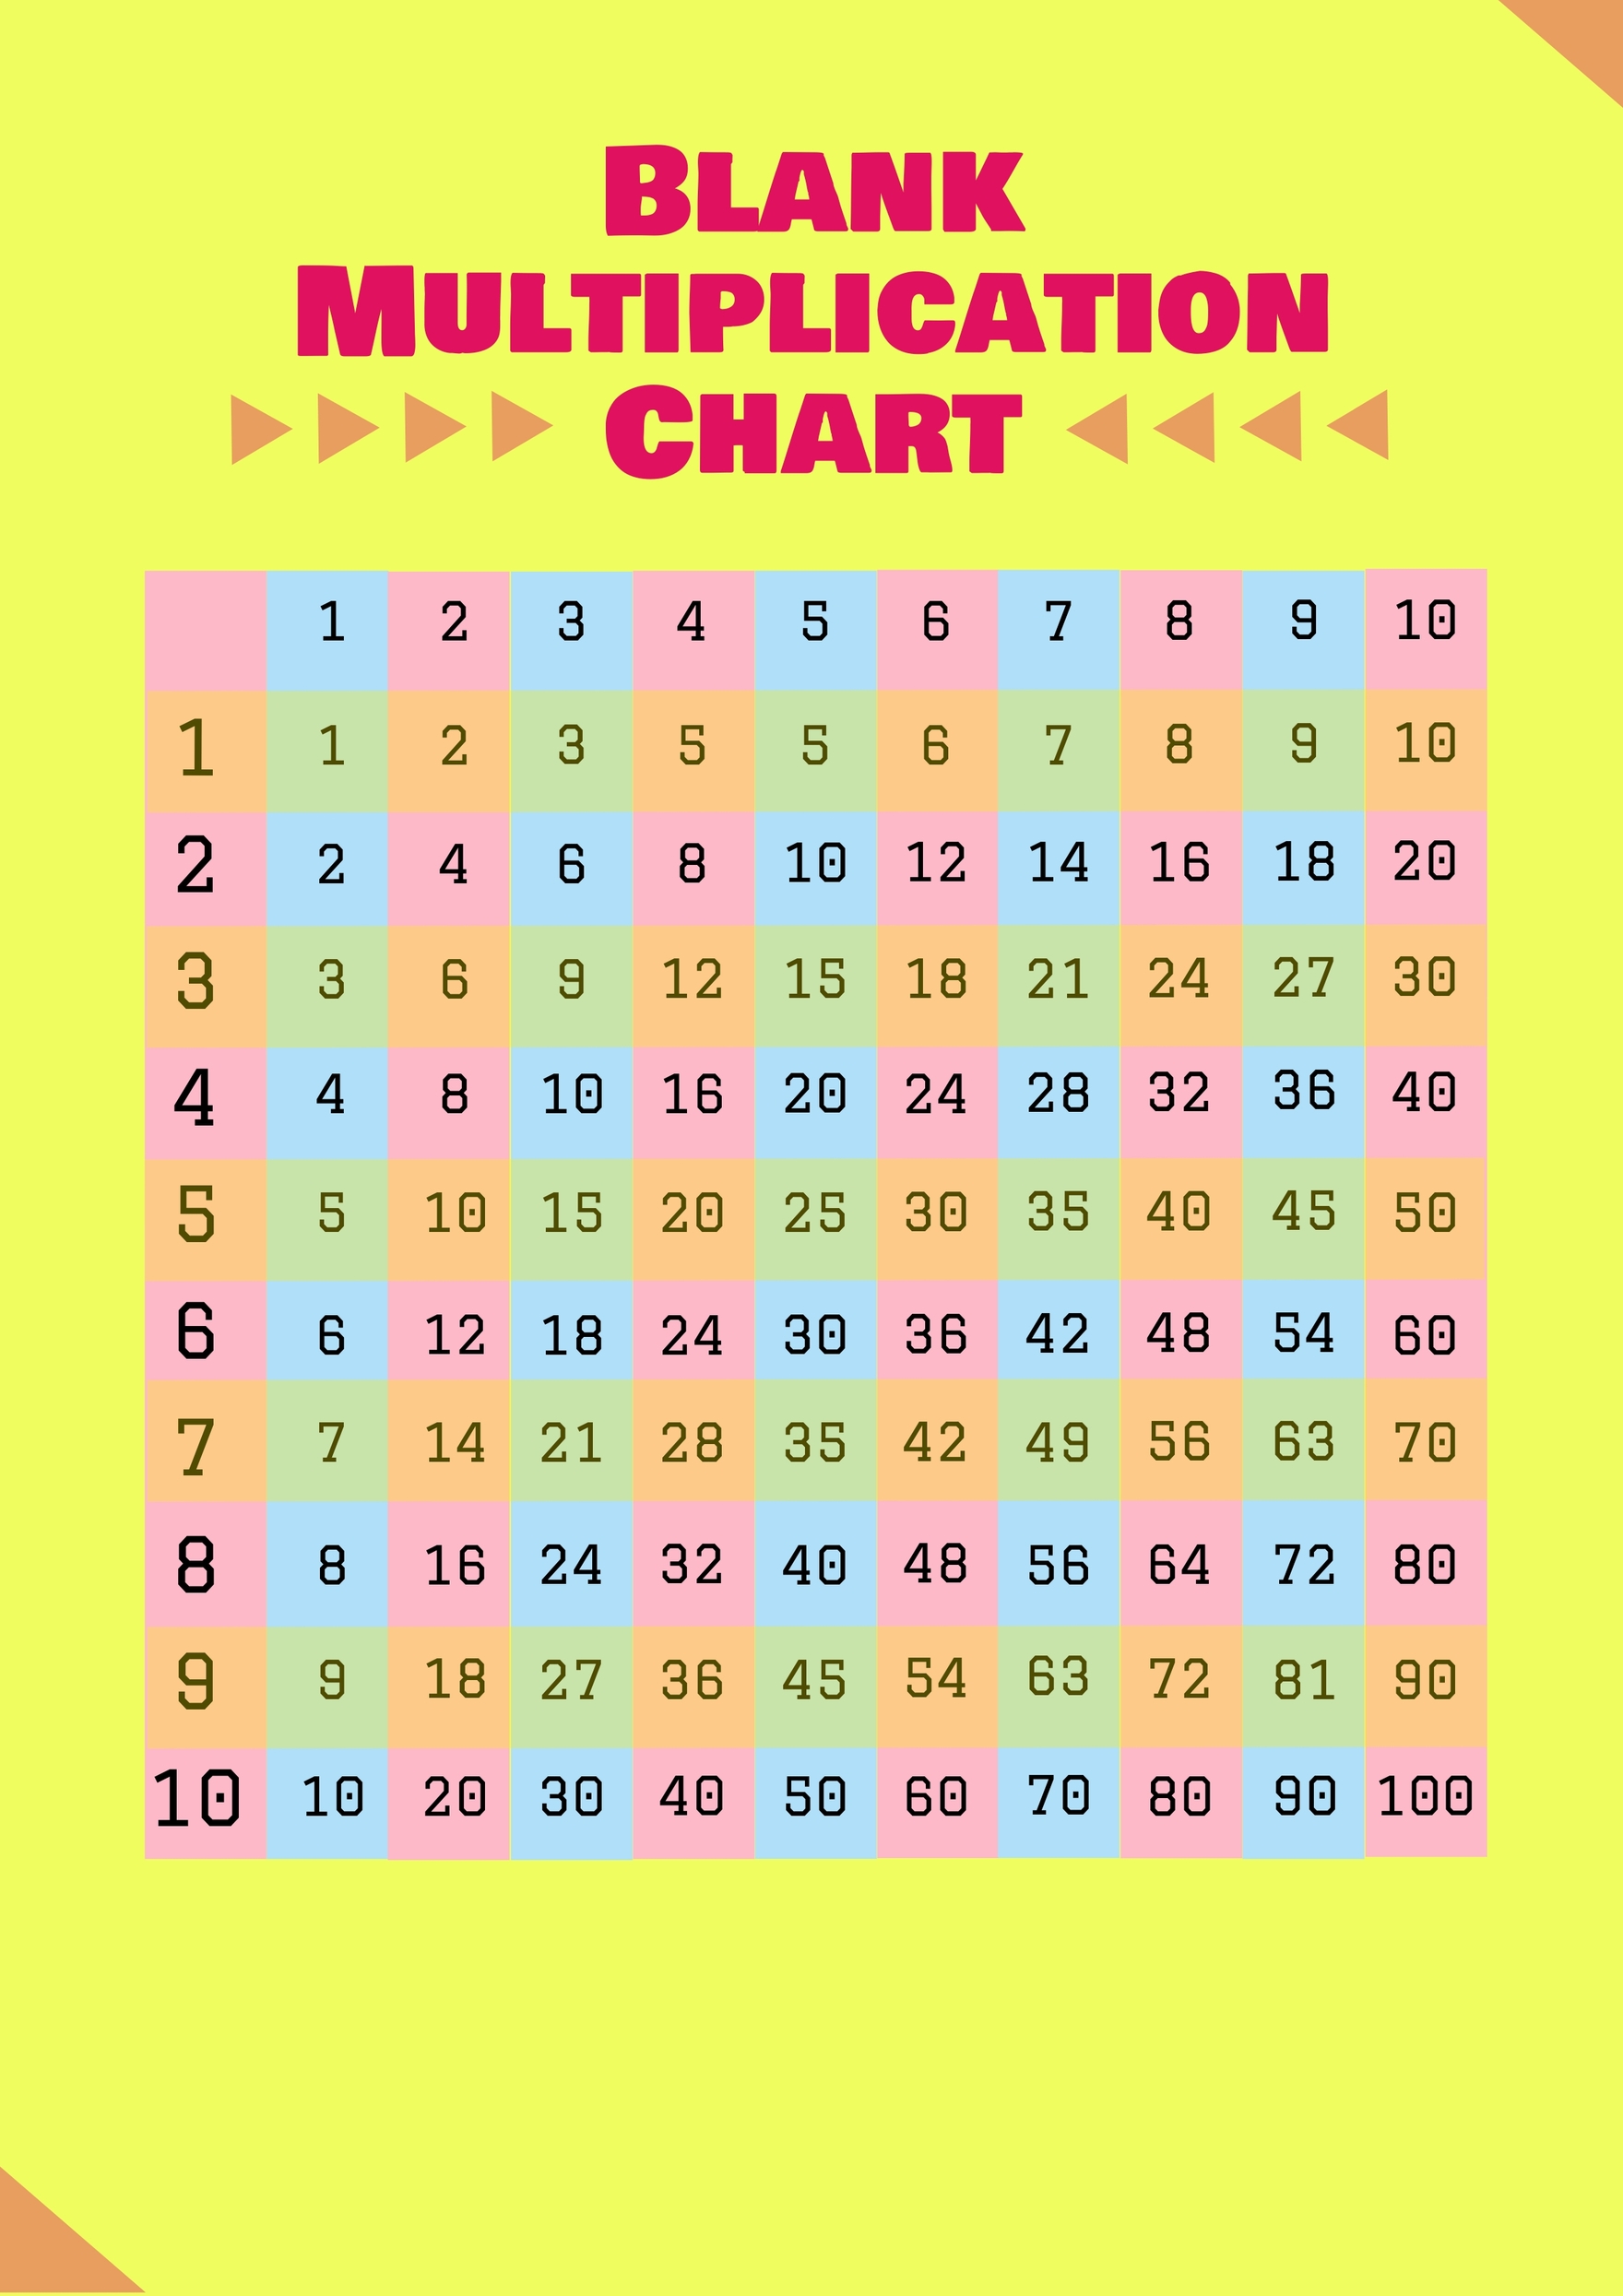 Free Blank Multiplication Chart Download In PDF Illustrator Template